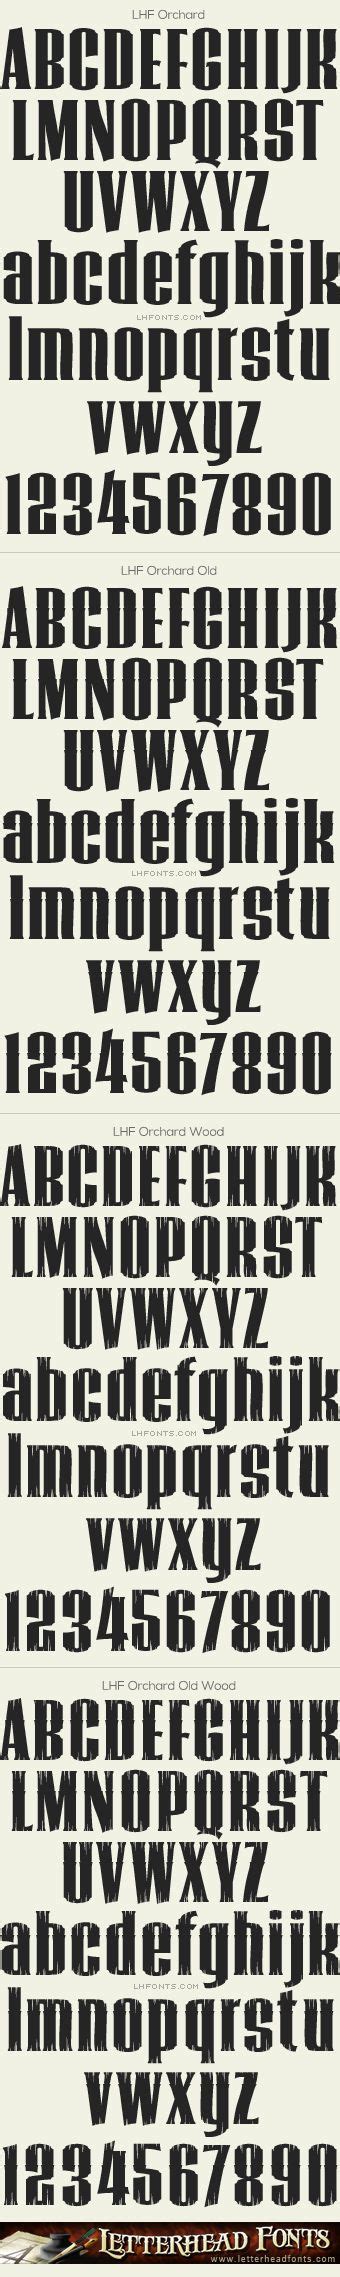 Letterhead, now used on hard copies and on digital correspondence, is easy and fun to design on your own. 177 best Letterhead Fonts images on Pinterest | Auction ...